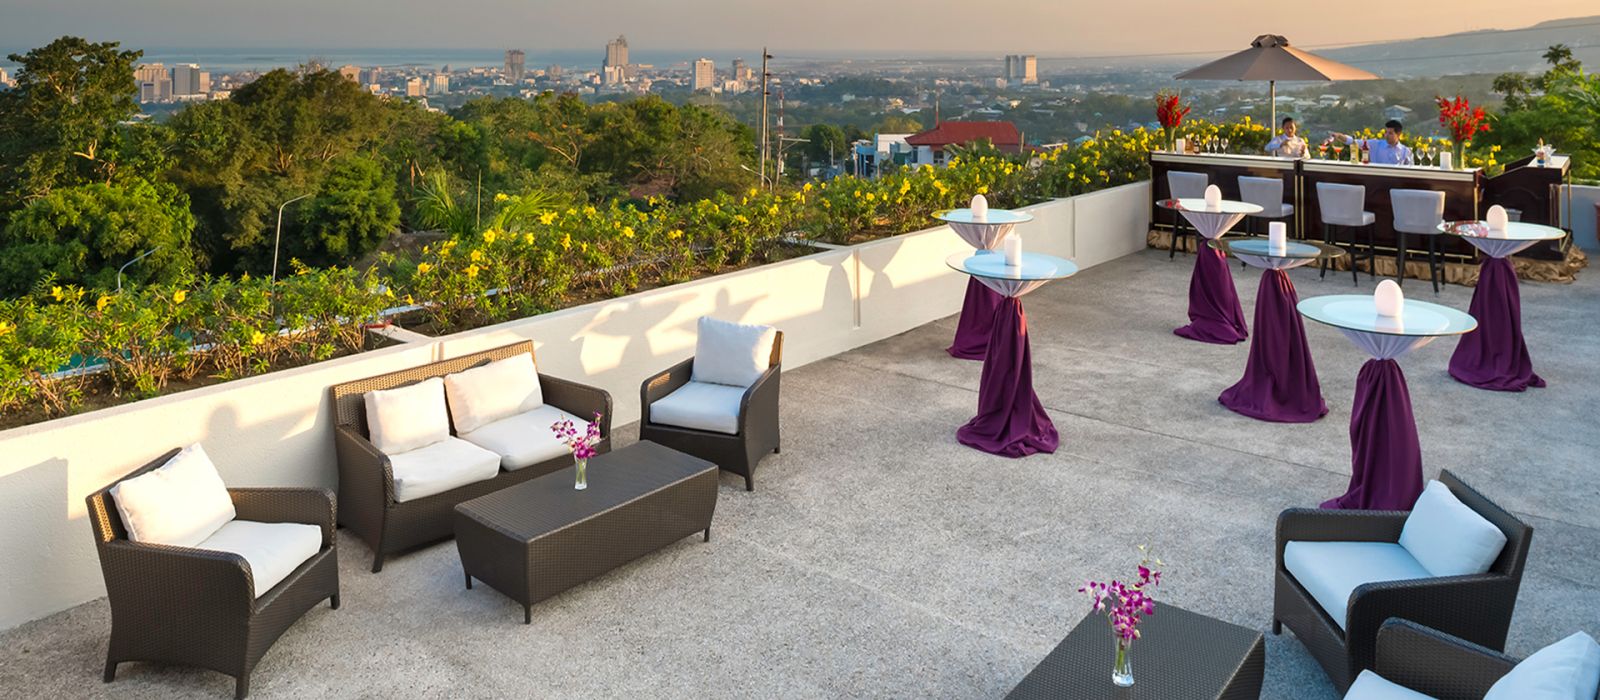 The only one of its kind in Cebu city, the Grand Balcony&#x27;s large open space with uninterrupted skyline views spaciously accommodates up to 1,500 guests for receptions and cocktail events.